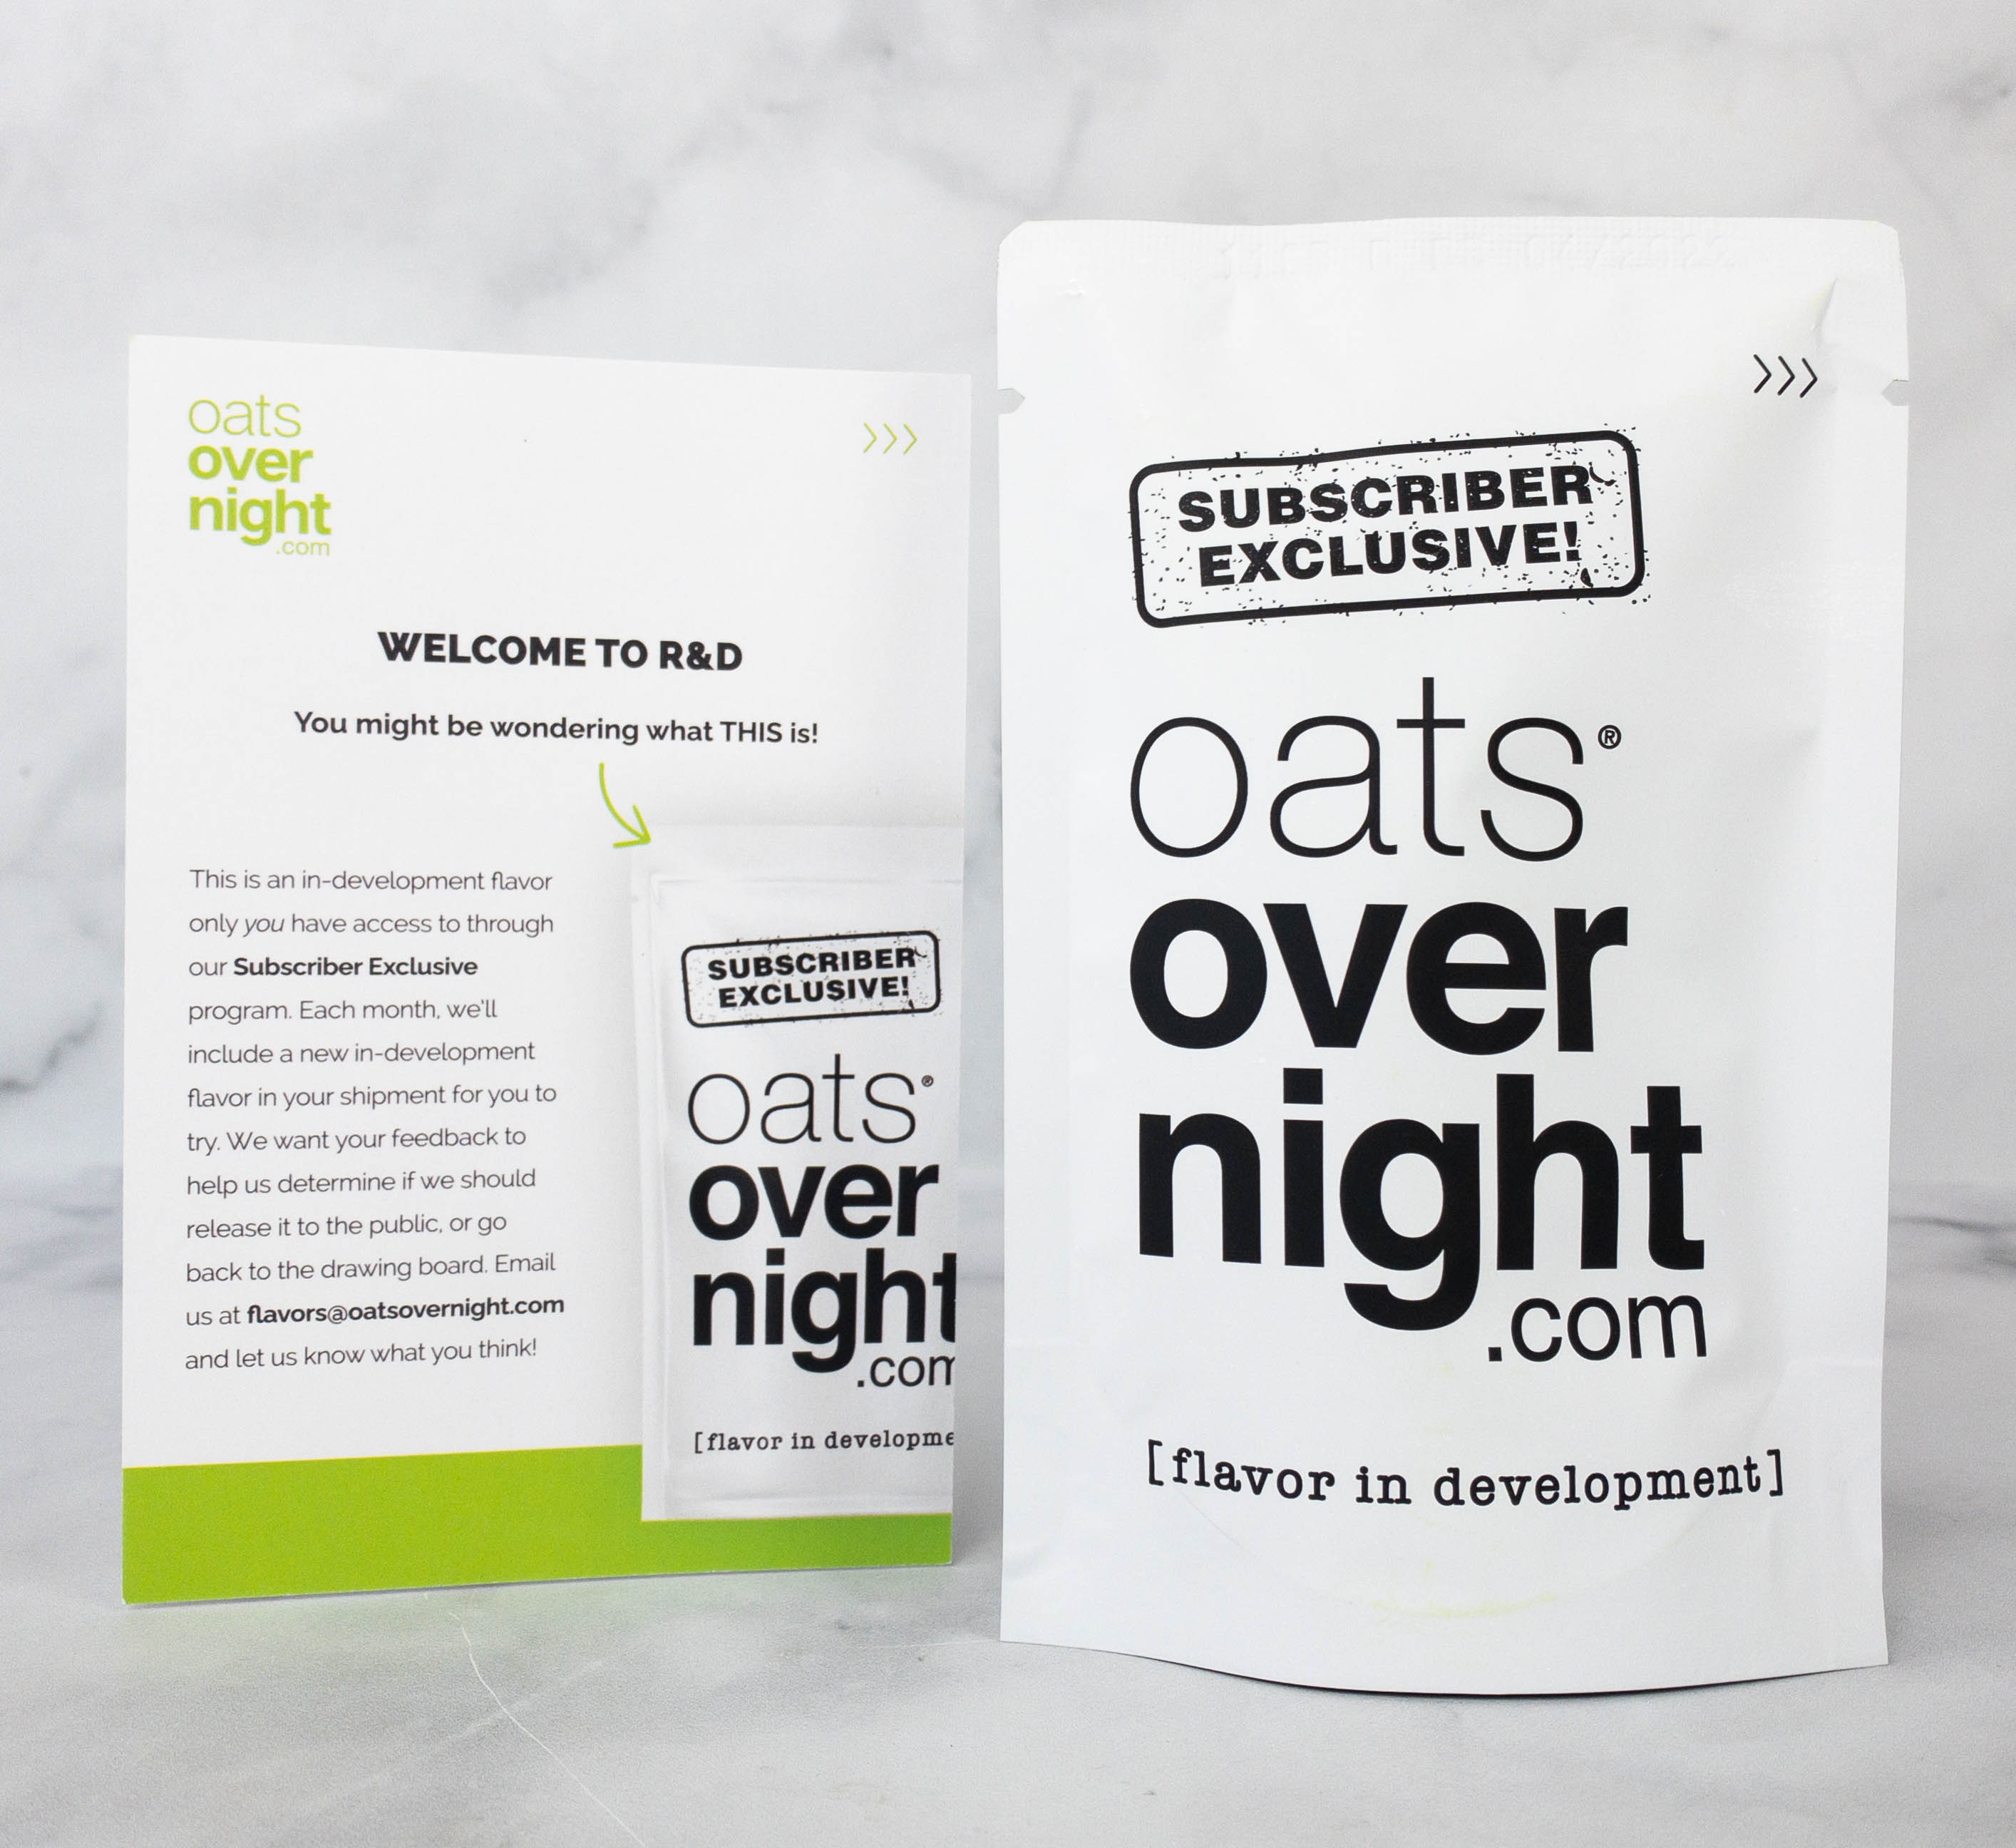 https://hellosubscription.com/wp-content/uploads/2021/05/oats-overnight-review-6.jpg?quality=90&strip=all